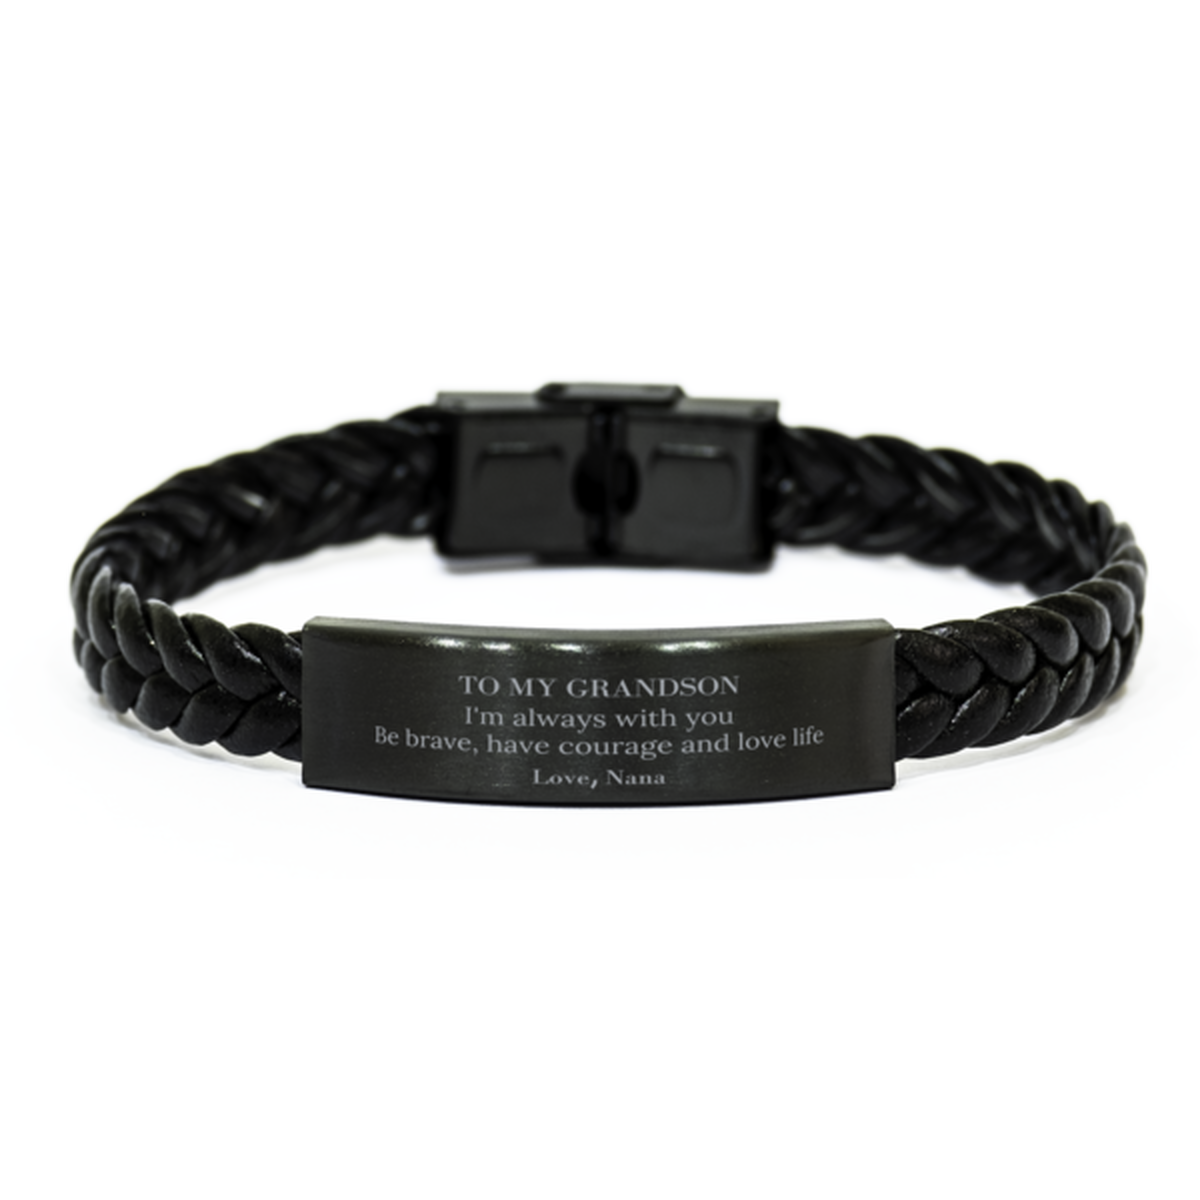 To My Grandson Gifts from Nana, Unique Braided Leather Bracelet Inspirational Christmas Birthday Graduation Gifts for Grandson I'm always with you. Be brave, have courage and love life. Love, Nana